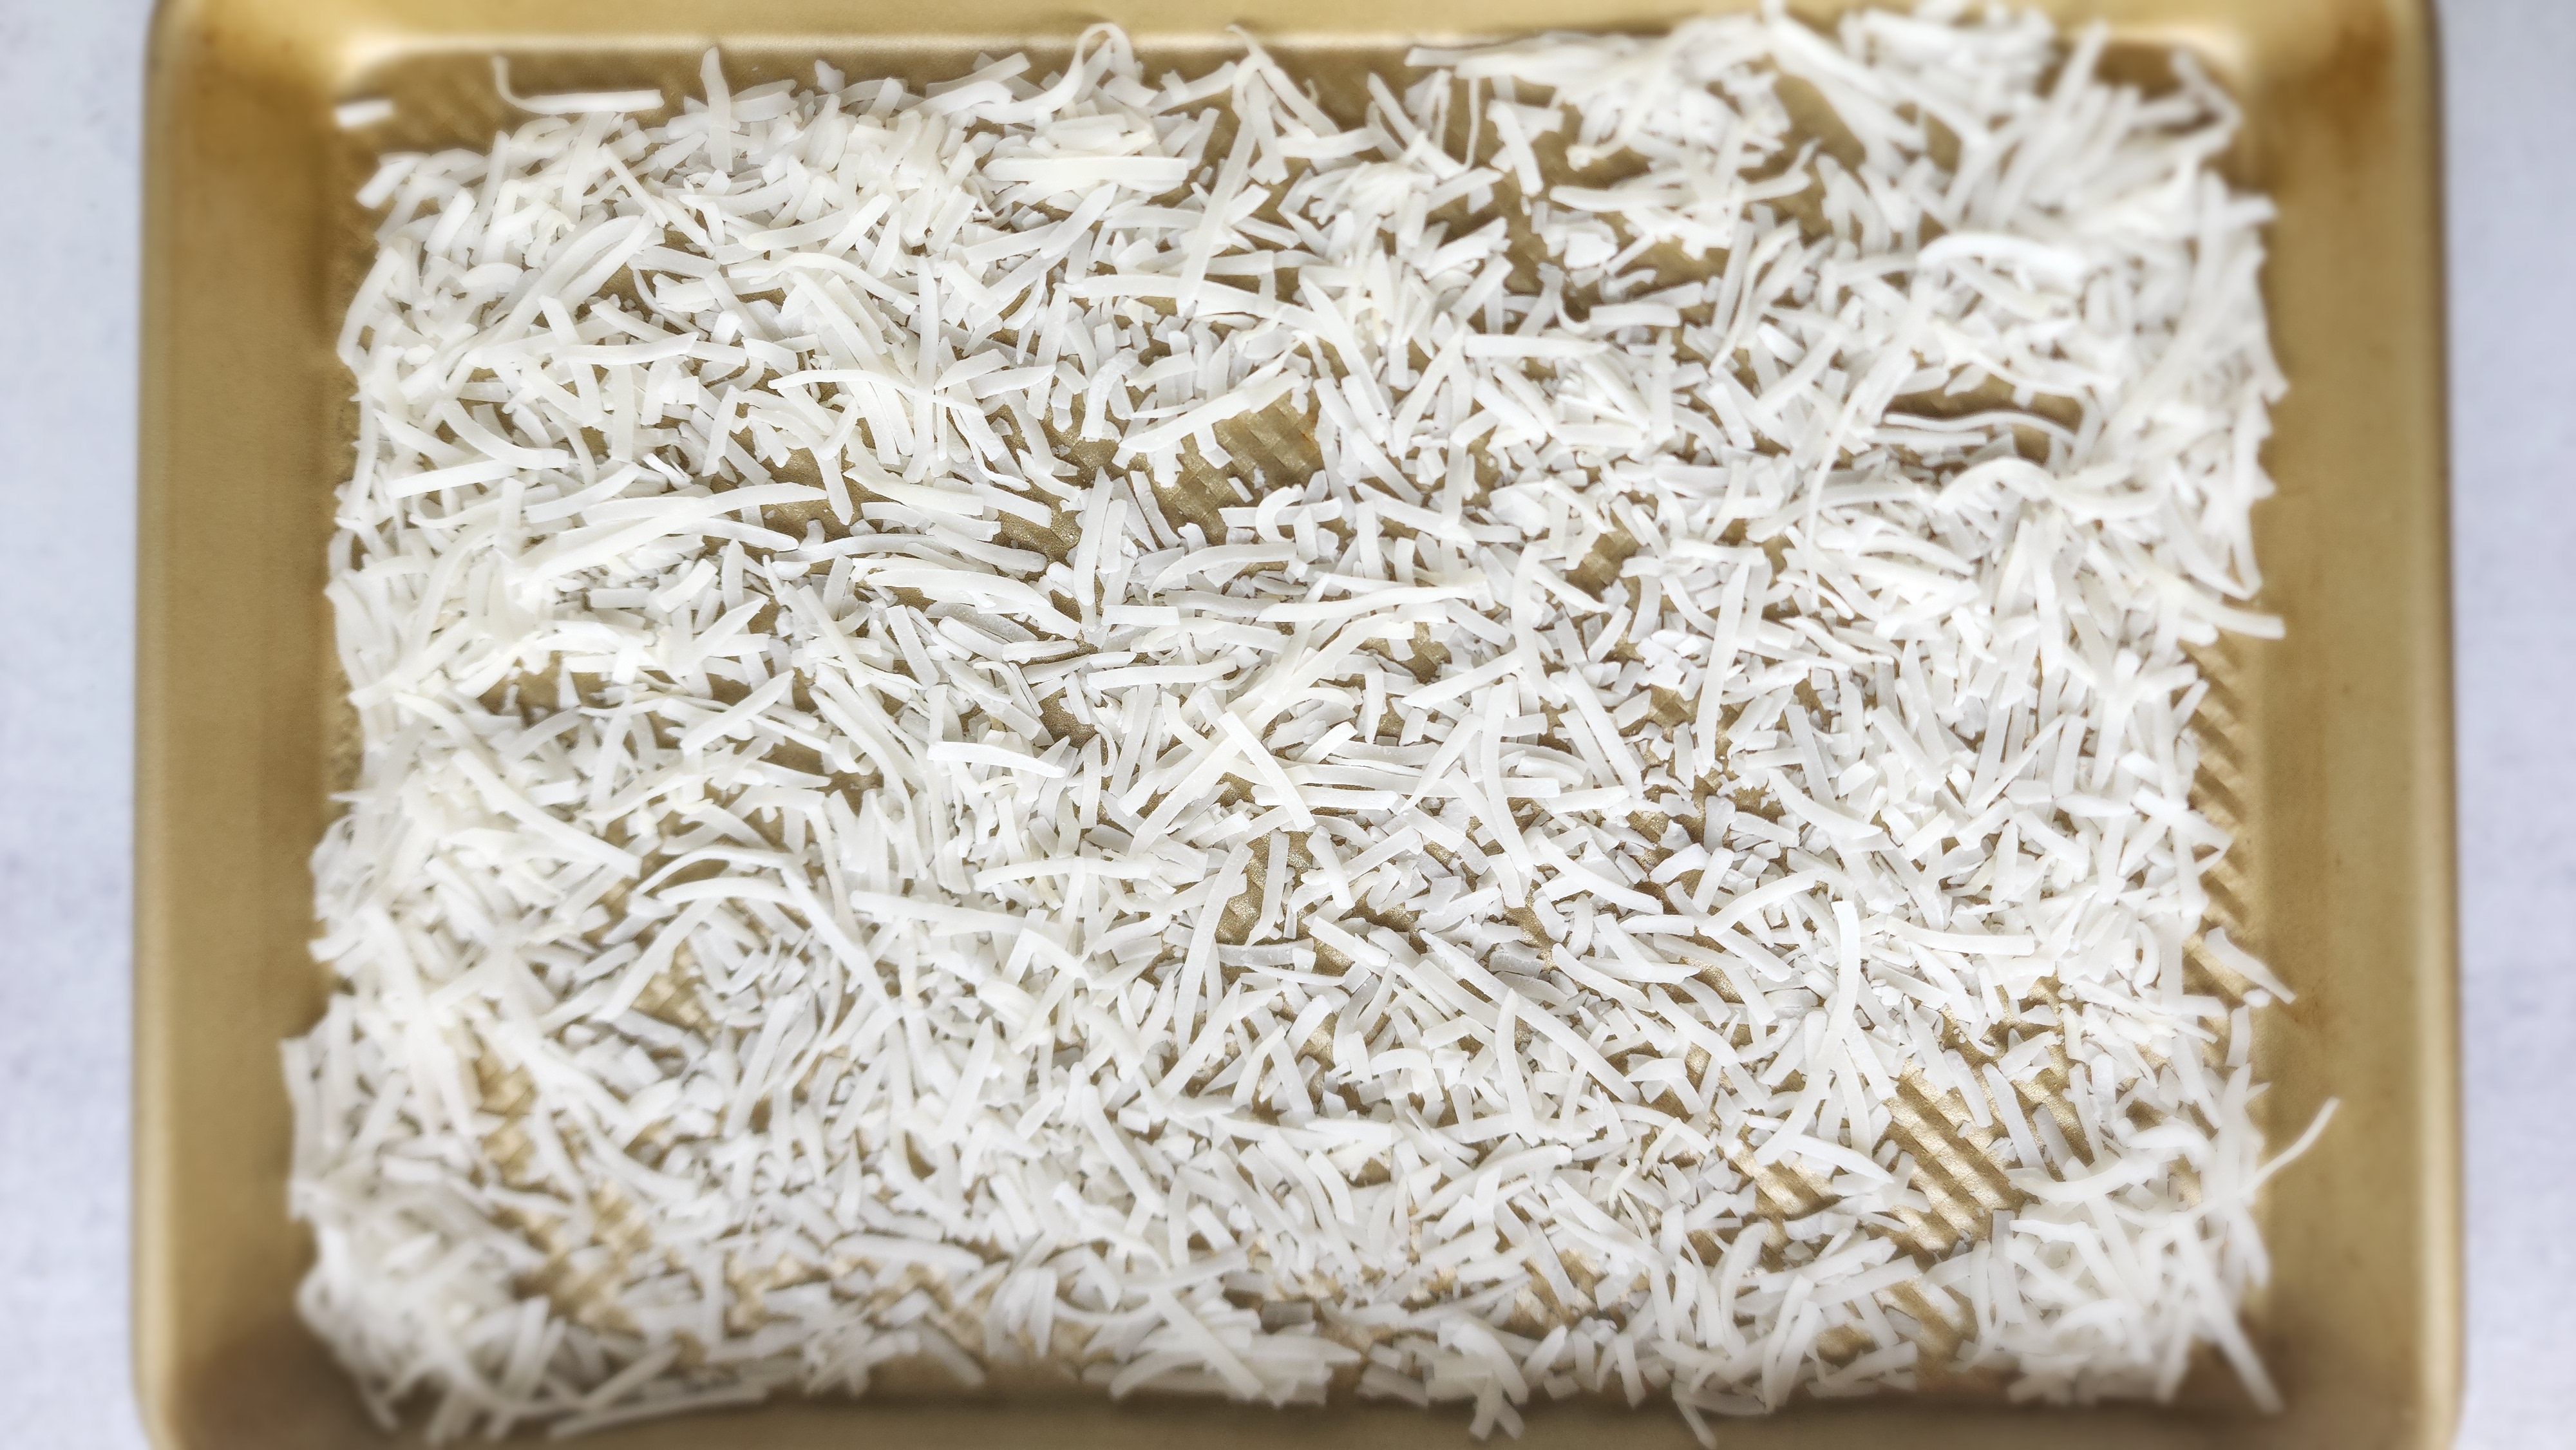 Coconut flakes on a sheet pan